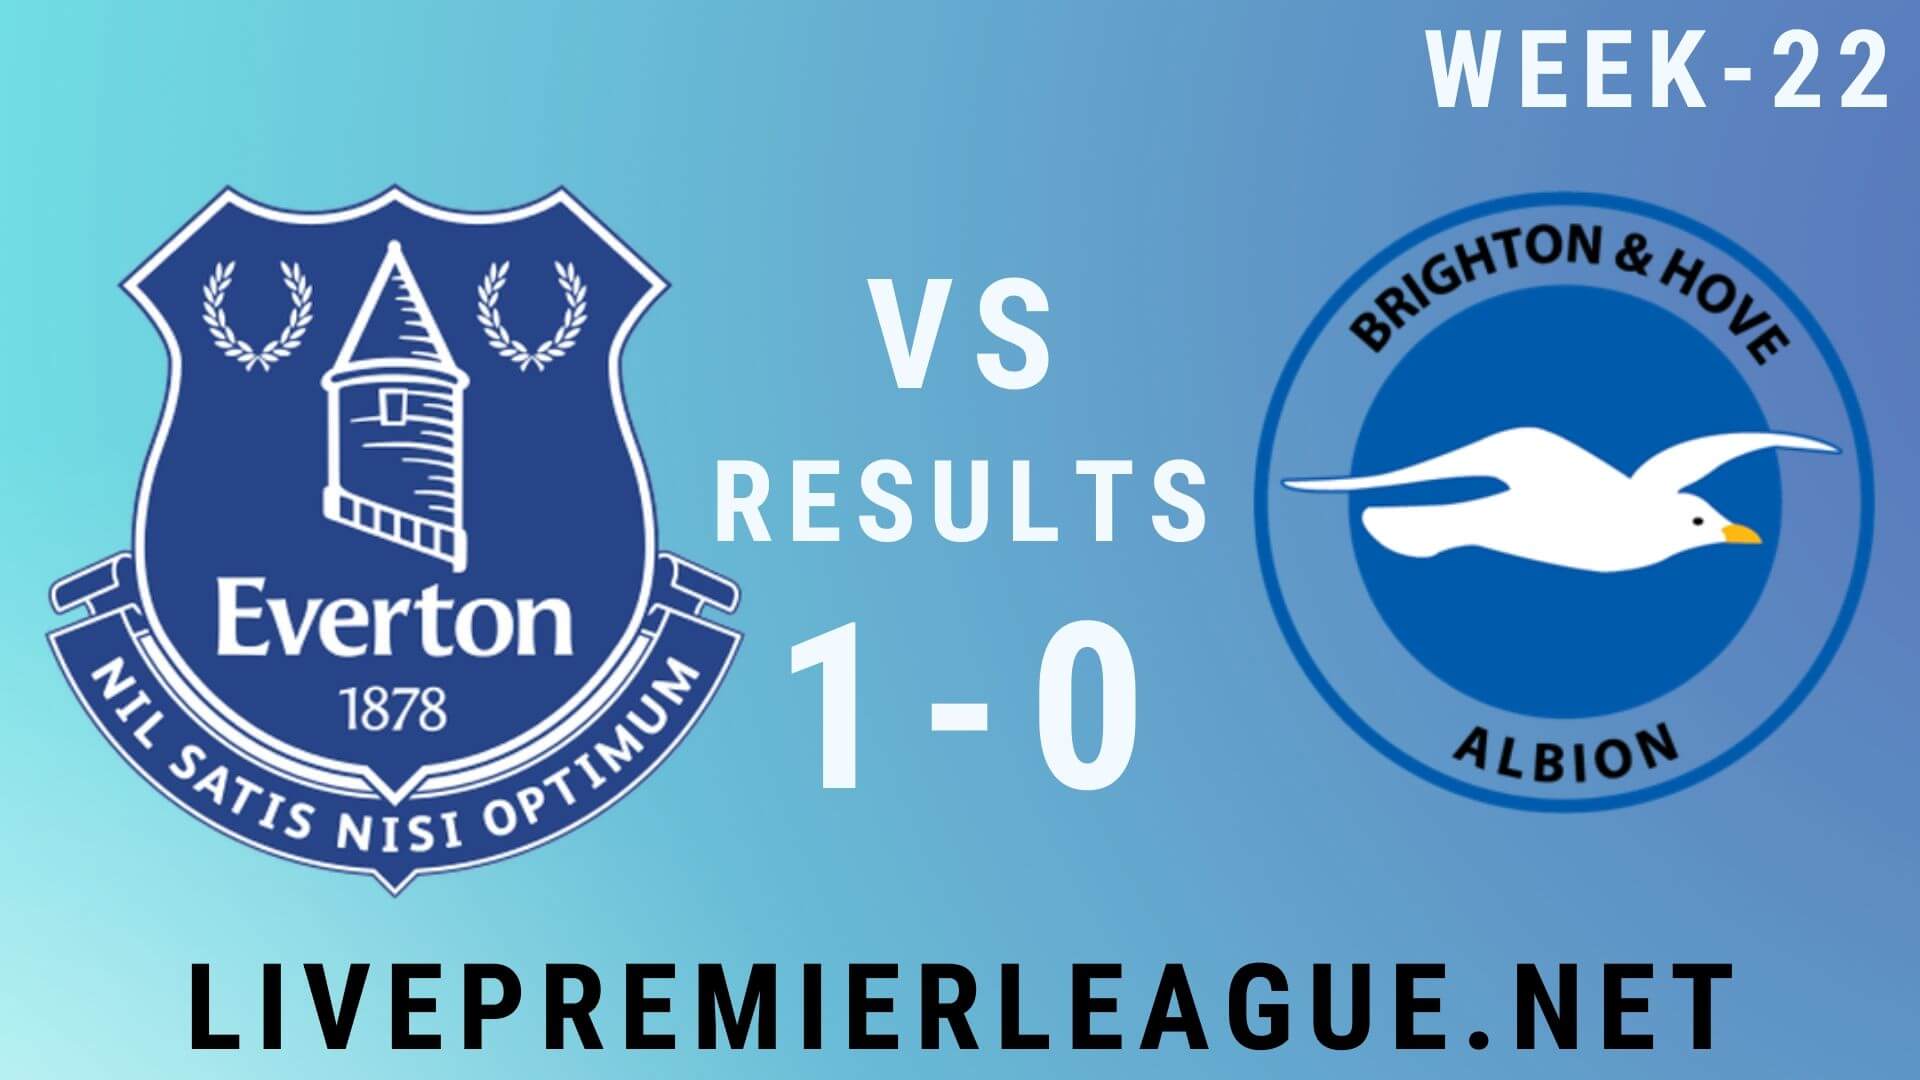 Everton Vs Brighton and Hove Albion | Week 22 Result 2020